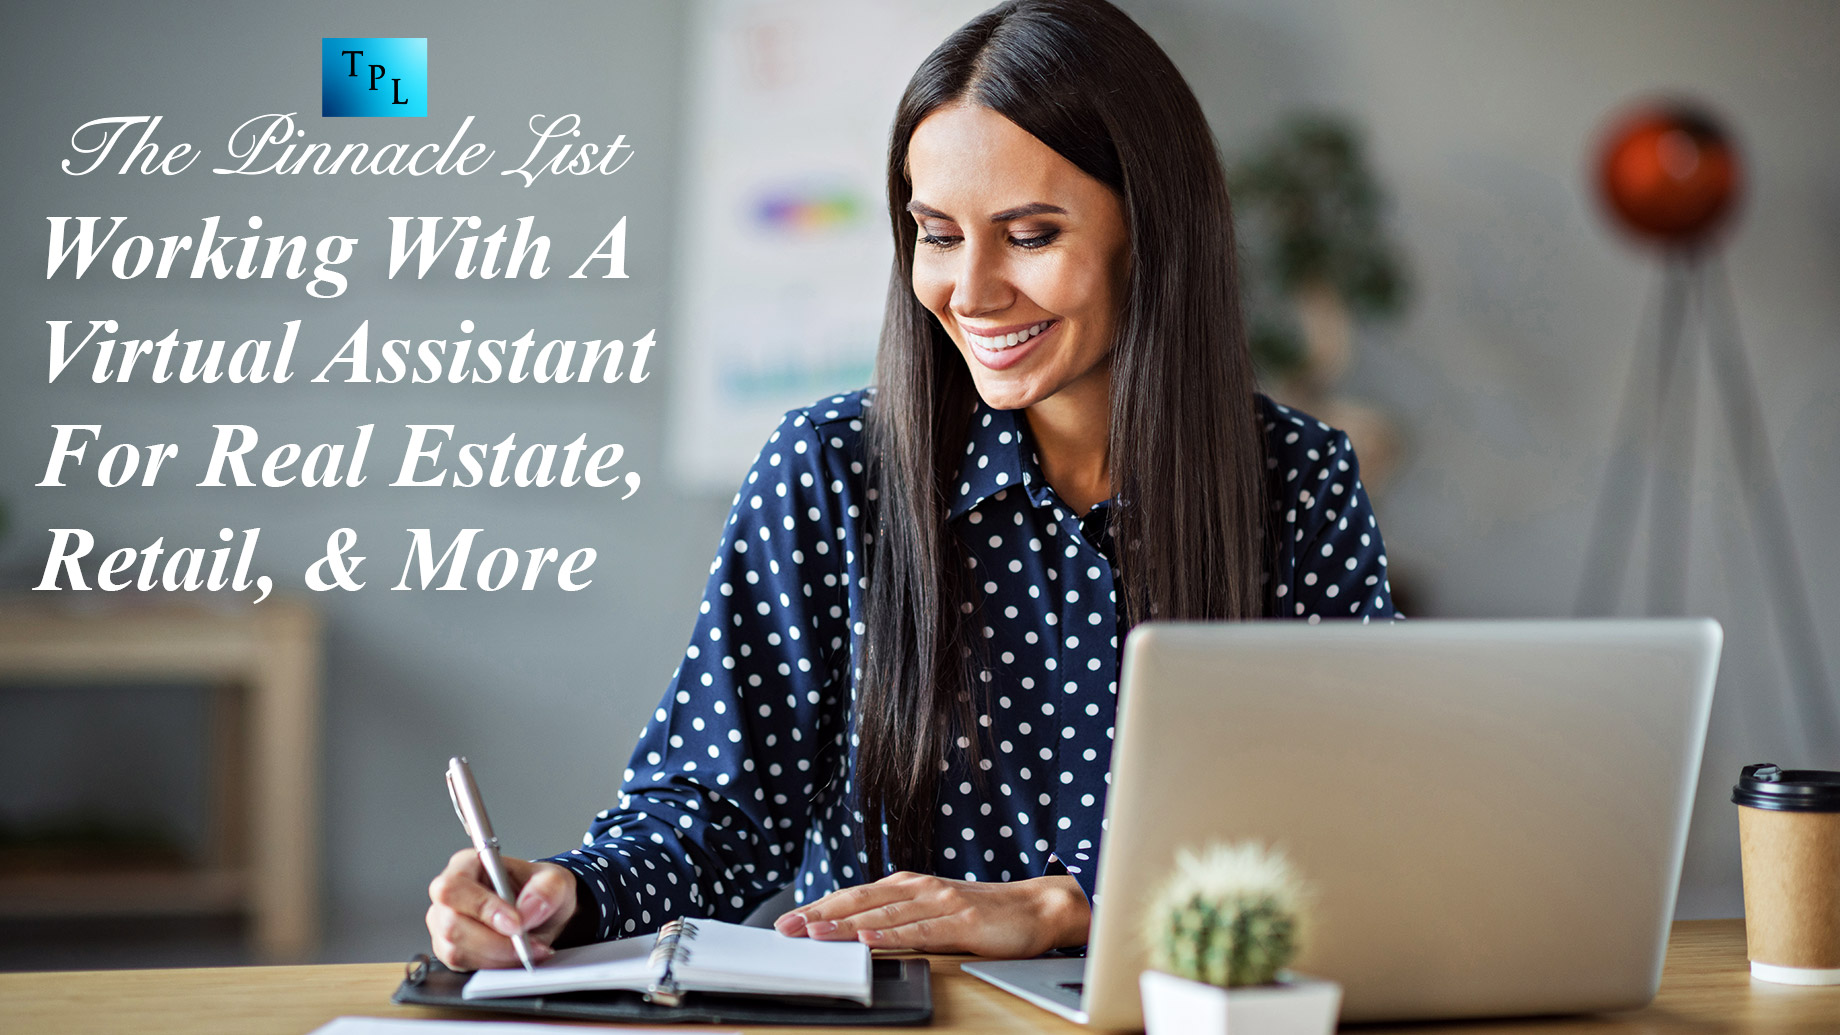 Working With A Virtual Assistant For Real Estate, Retail, & More